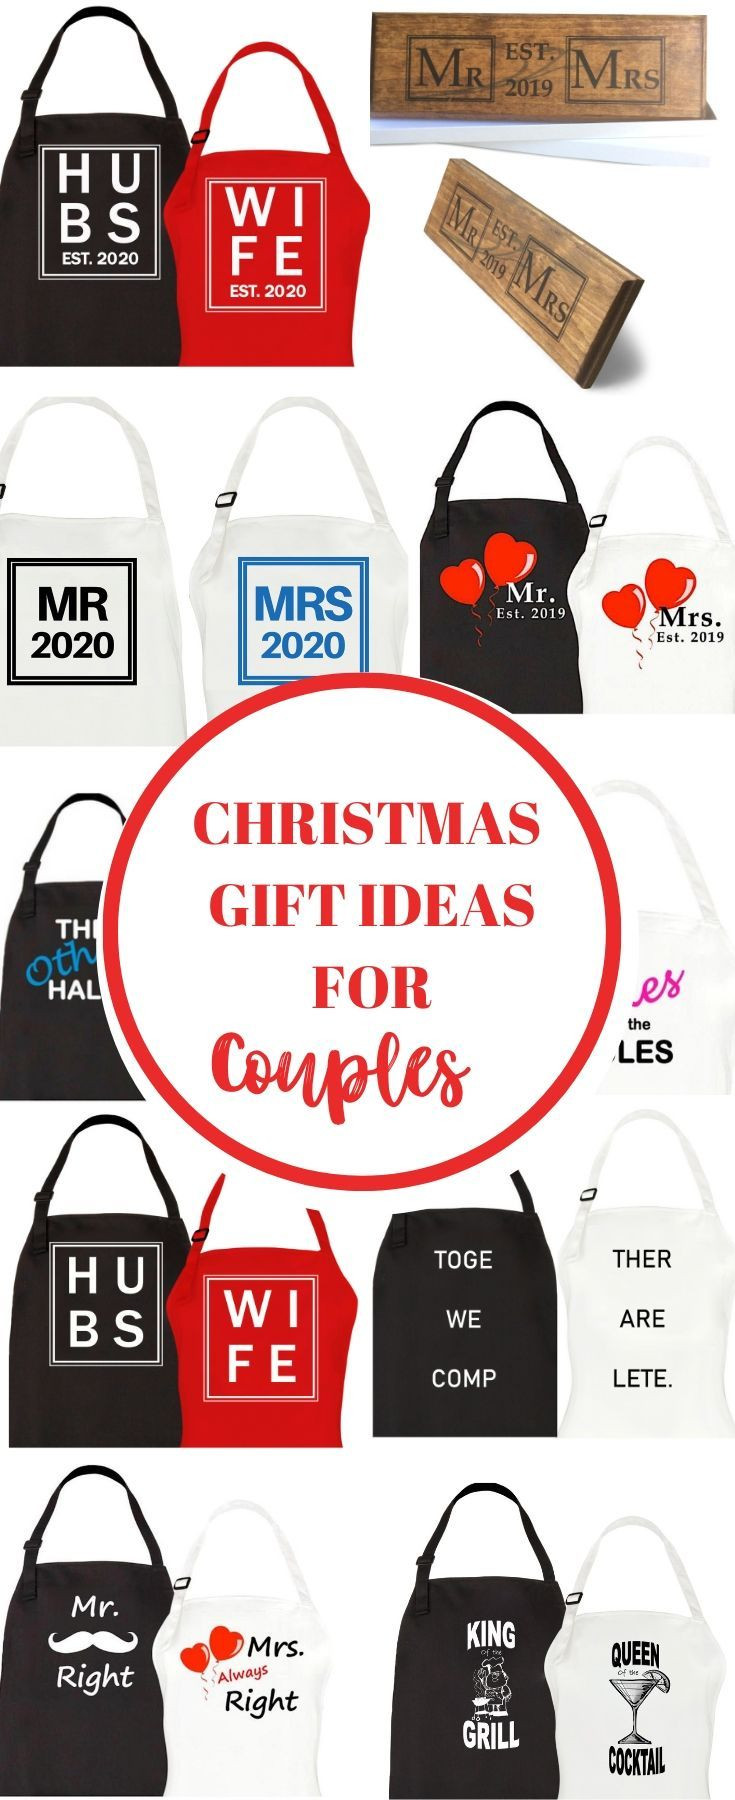 Christmas Gift Ideas For Newly Engaged Couple
 Great Ideas for any Newlyweds or Newly Engaged Couples on